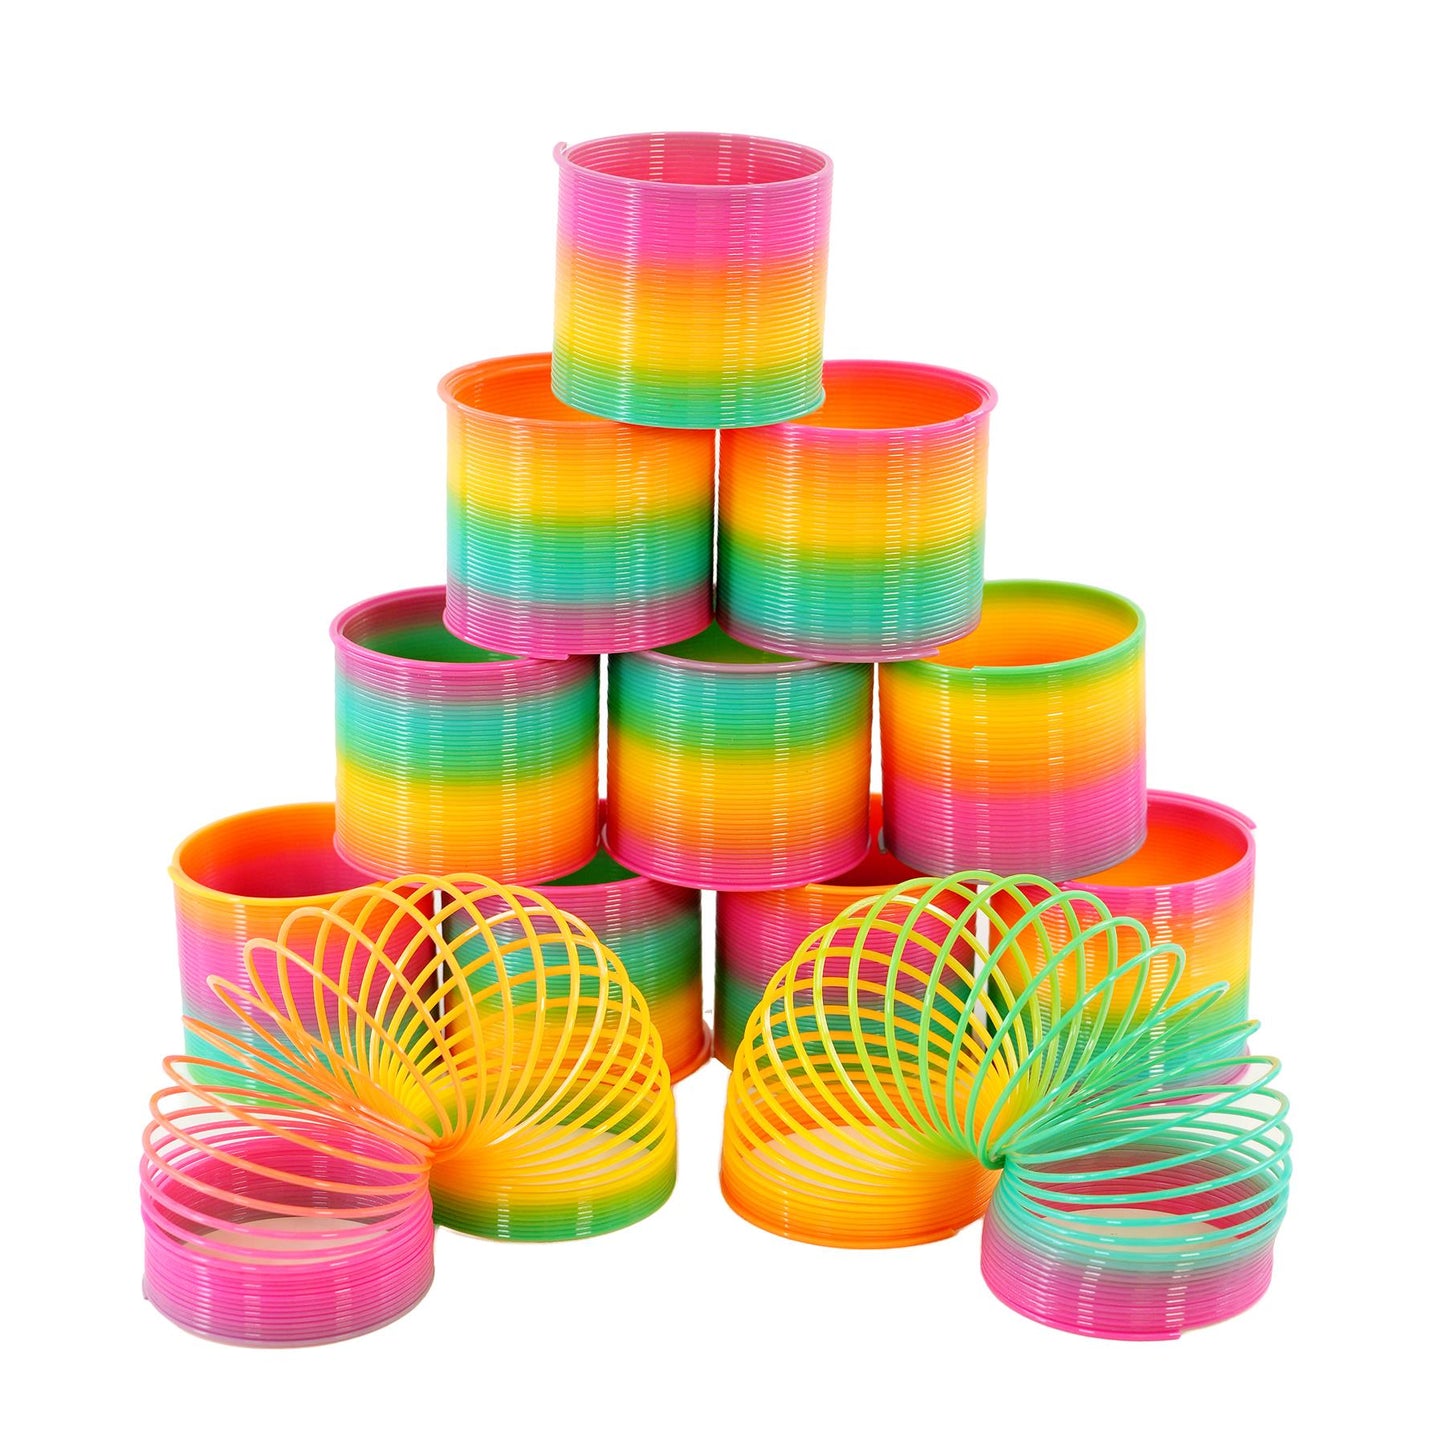 Rainbow Springs - Set Of 12 by The Magic Toy Shop - UKBuyZone